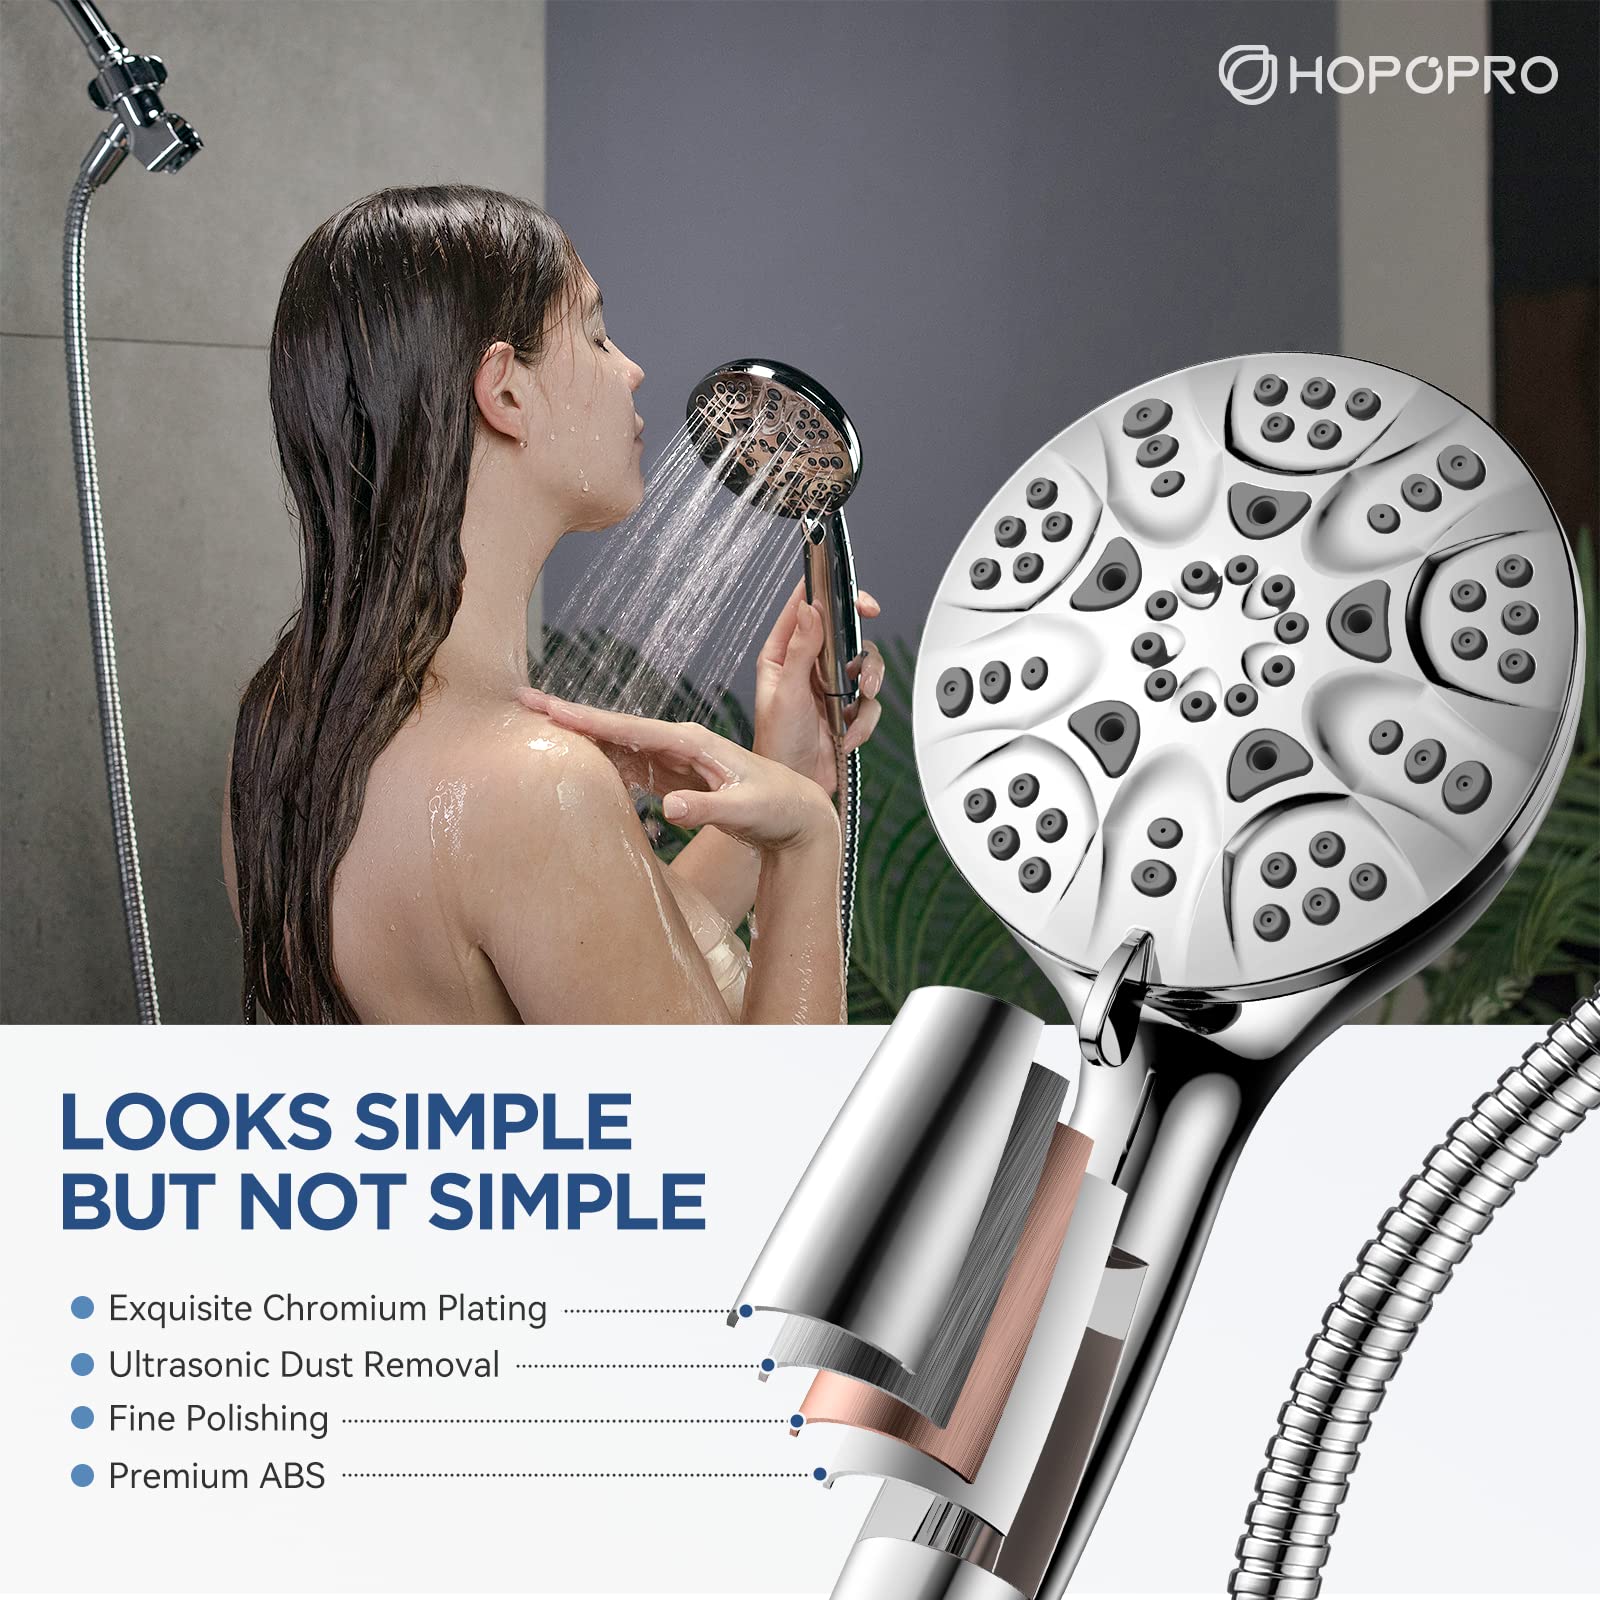 HOPOPRO High Pressure Shower Head with Handheld 7 Spray Settings Detachable Shower Head Built-in Power Spray to Clean Corner Tub and Pets, Extra Long Stainless Steel Hose & Adjustable Bracket